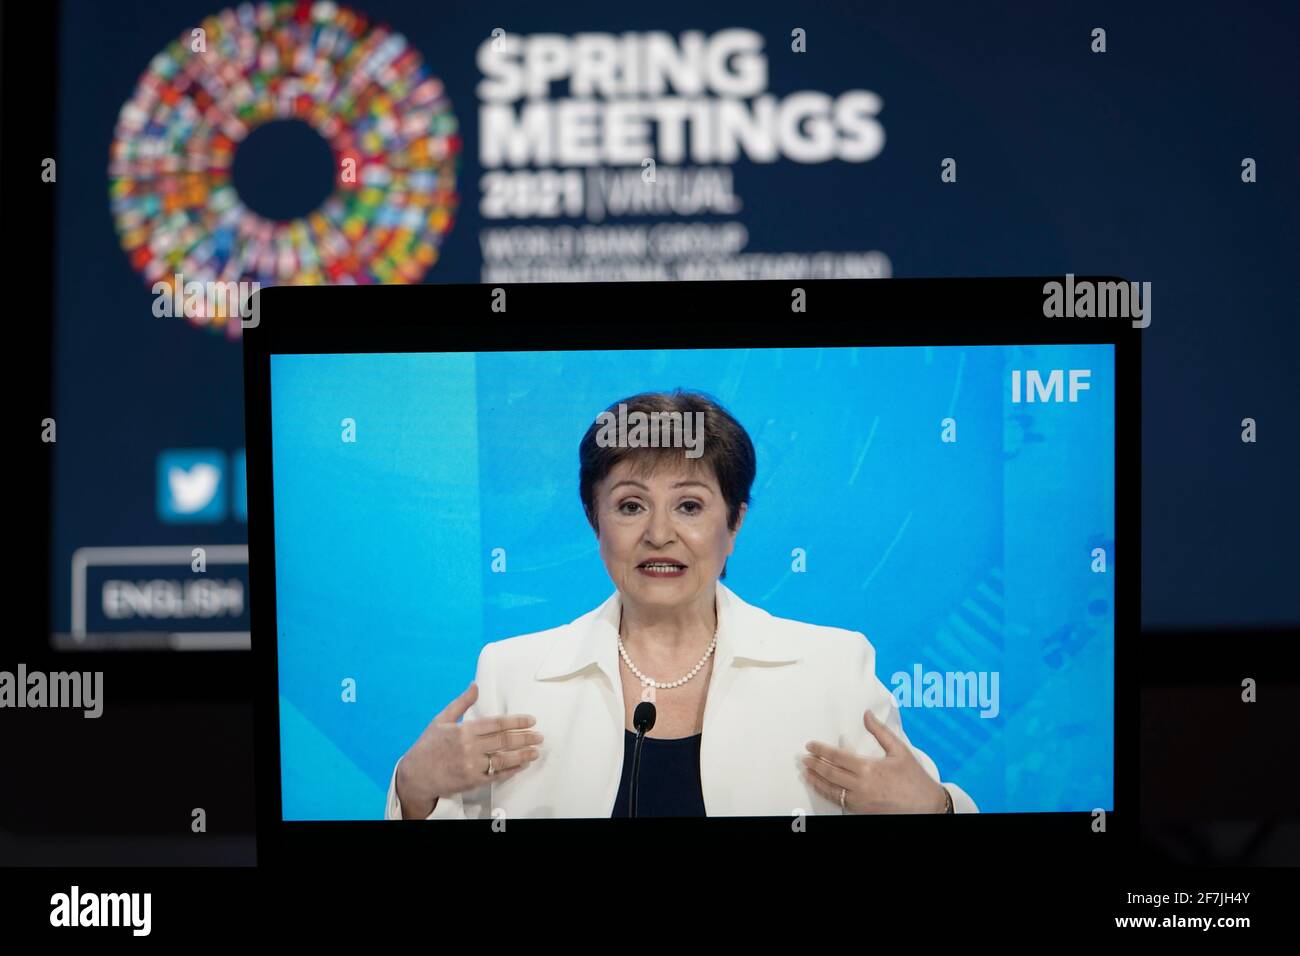 (210408) -- WASHINGTON, D.C., April 8, 2021 (Xinhua) -- Photo taken in Arlington, Virginia, the United States, on April 7, 2021 shows a screen displaying International Monetary Fund (IMF) Managing Director Kristalina Georgieva speaking at a virtual press conference during the IMF/World Bank Spring Meetings. Kristalina Georgieva on Wednesday urged policymakers to take the right actions by giving everyone a fair shot, as global economy is seeing a multi-speed recovery. (Xinhua/Liu Jie) Credit: Liu Jie/Xinhua/Alamy Live News Stock Photo